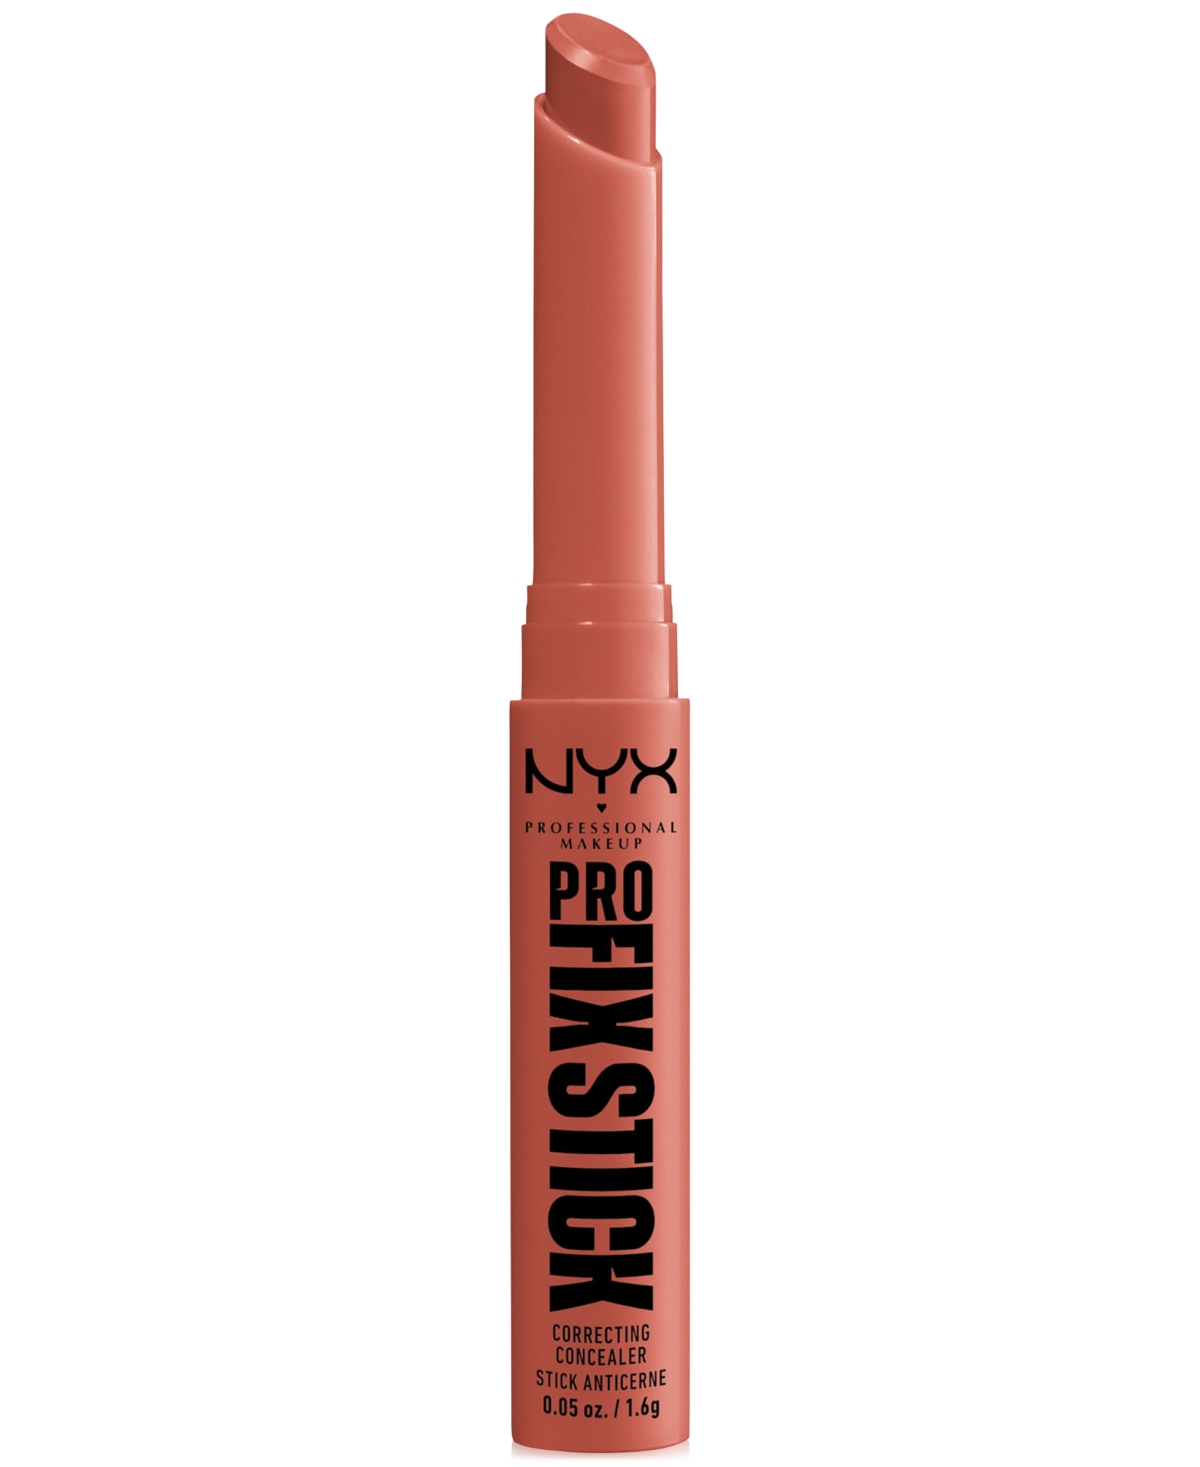 Nyx Professional Makeup Pro Fix Stick Correcting Concealer, 0.05 Oz. In Apricot